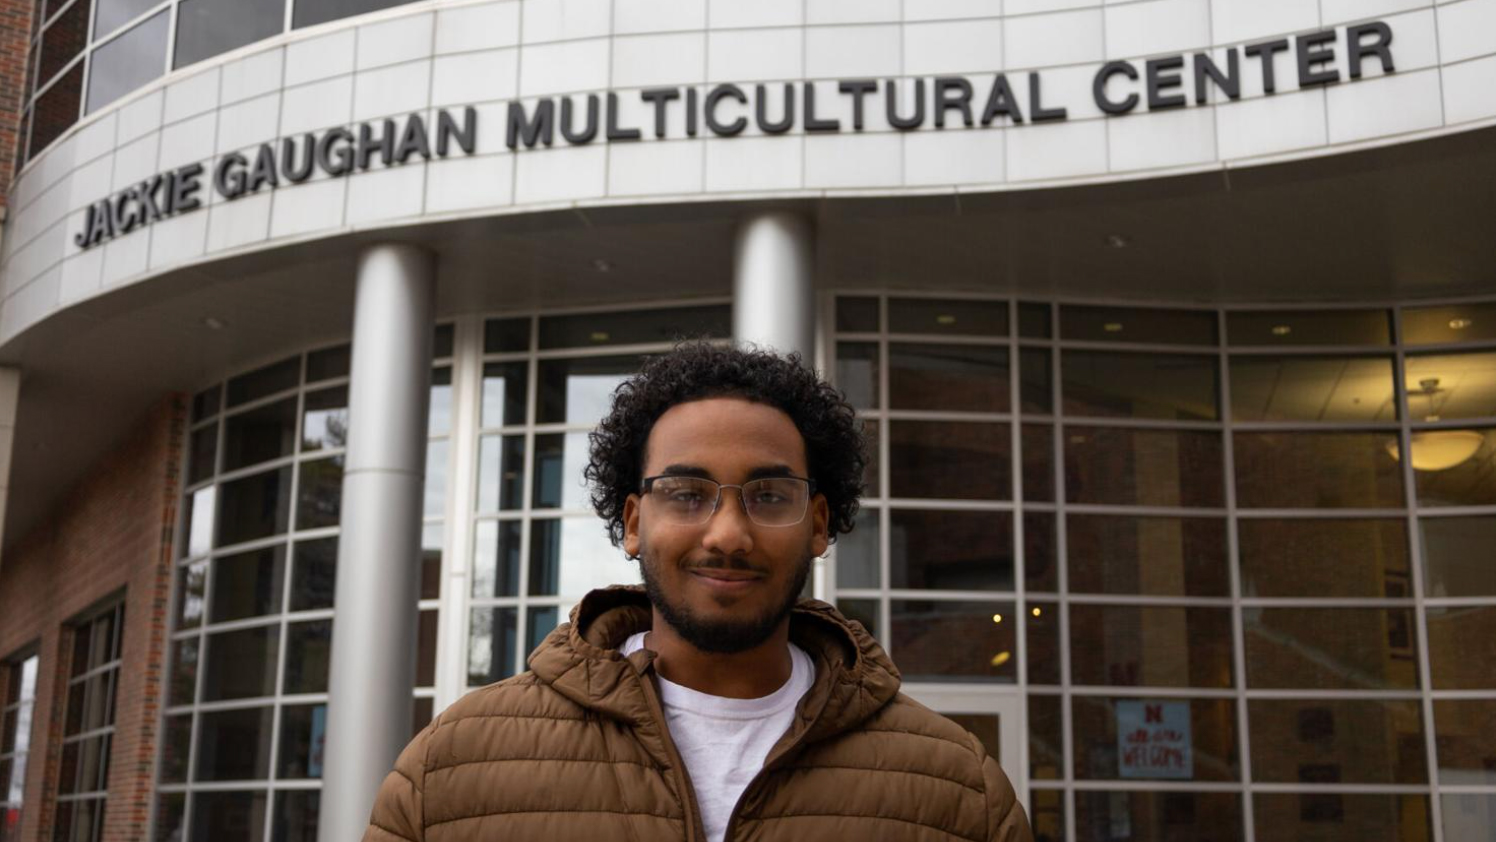 Ahmed Alsayid is pictured in front of the Jackie Gaughan Multicultural Center on Tuesday, March 7, 2023 in Lincoln, Nebraska. [photo by Emma Storms | Daily Nebraskan]